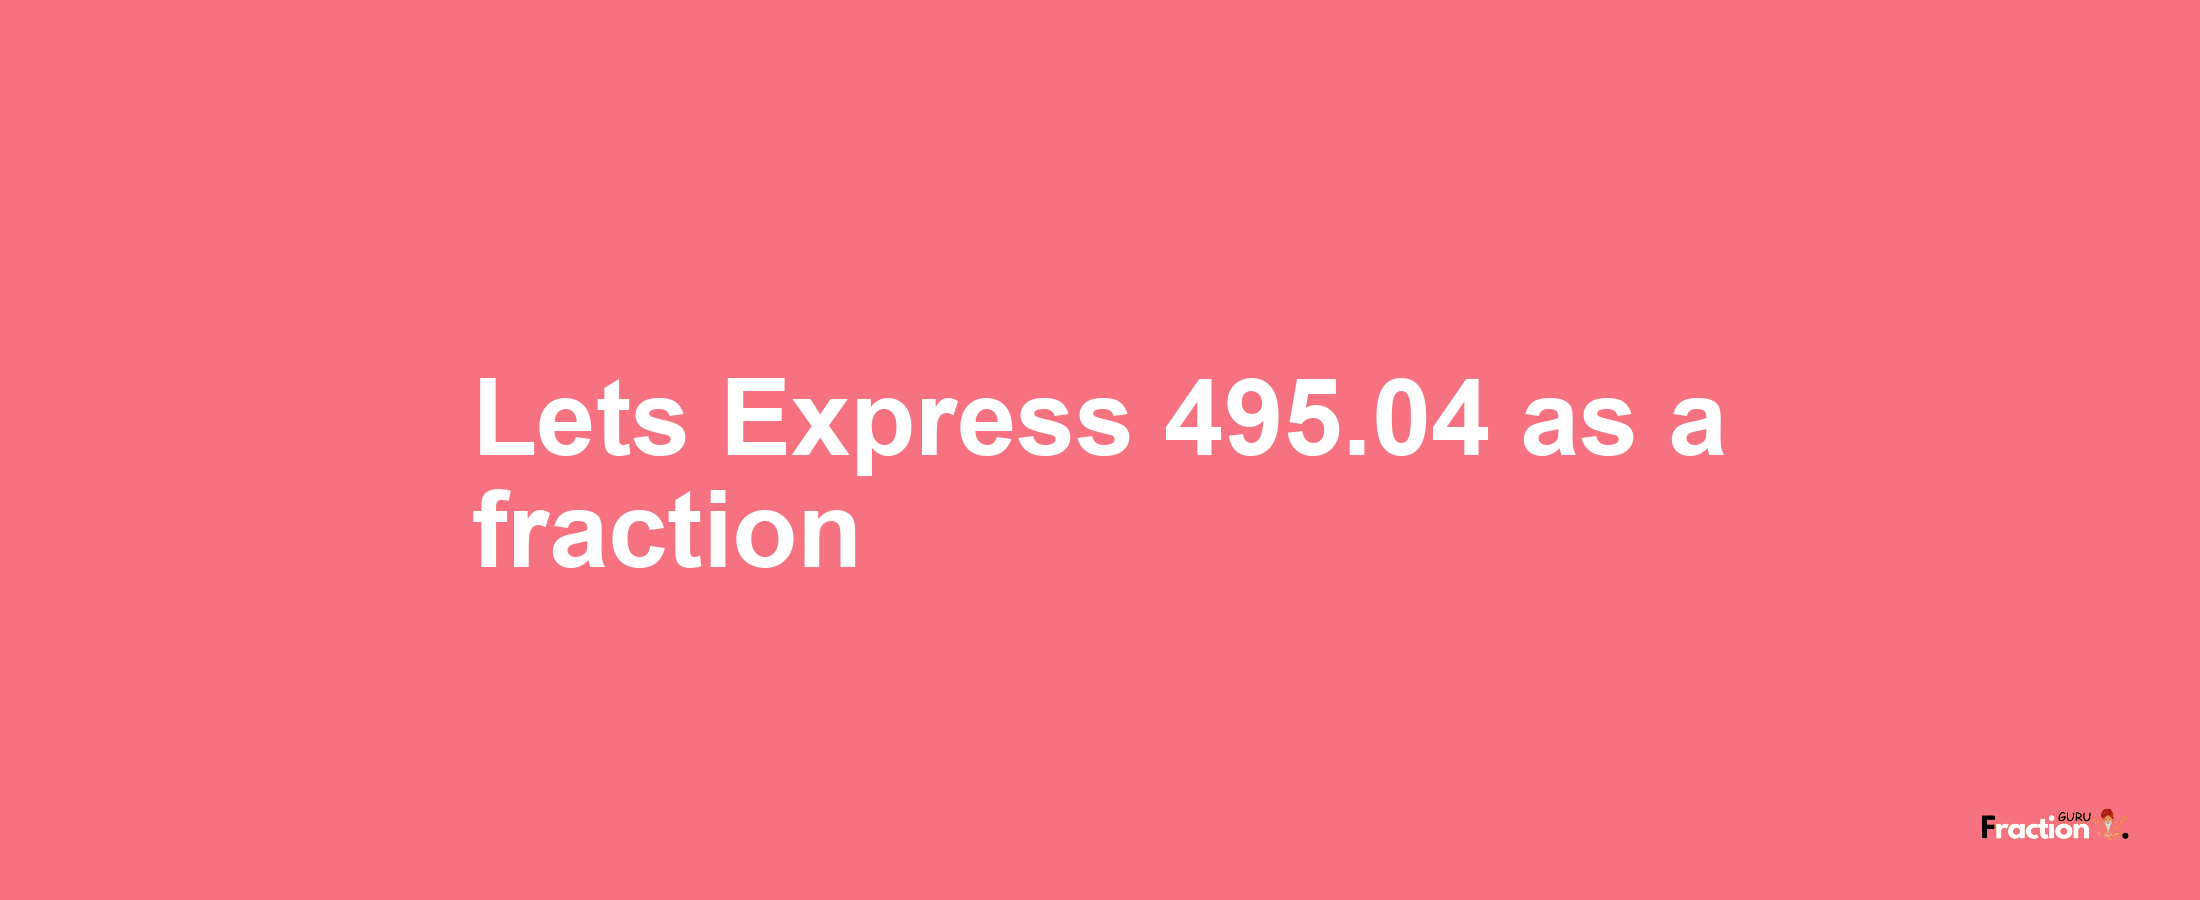 Lets Express 495.04 as afraction